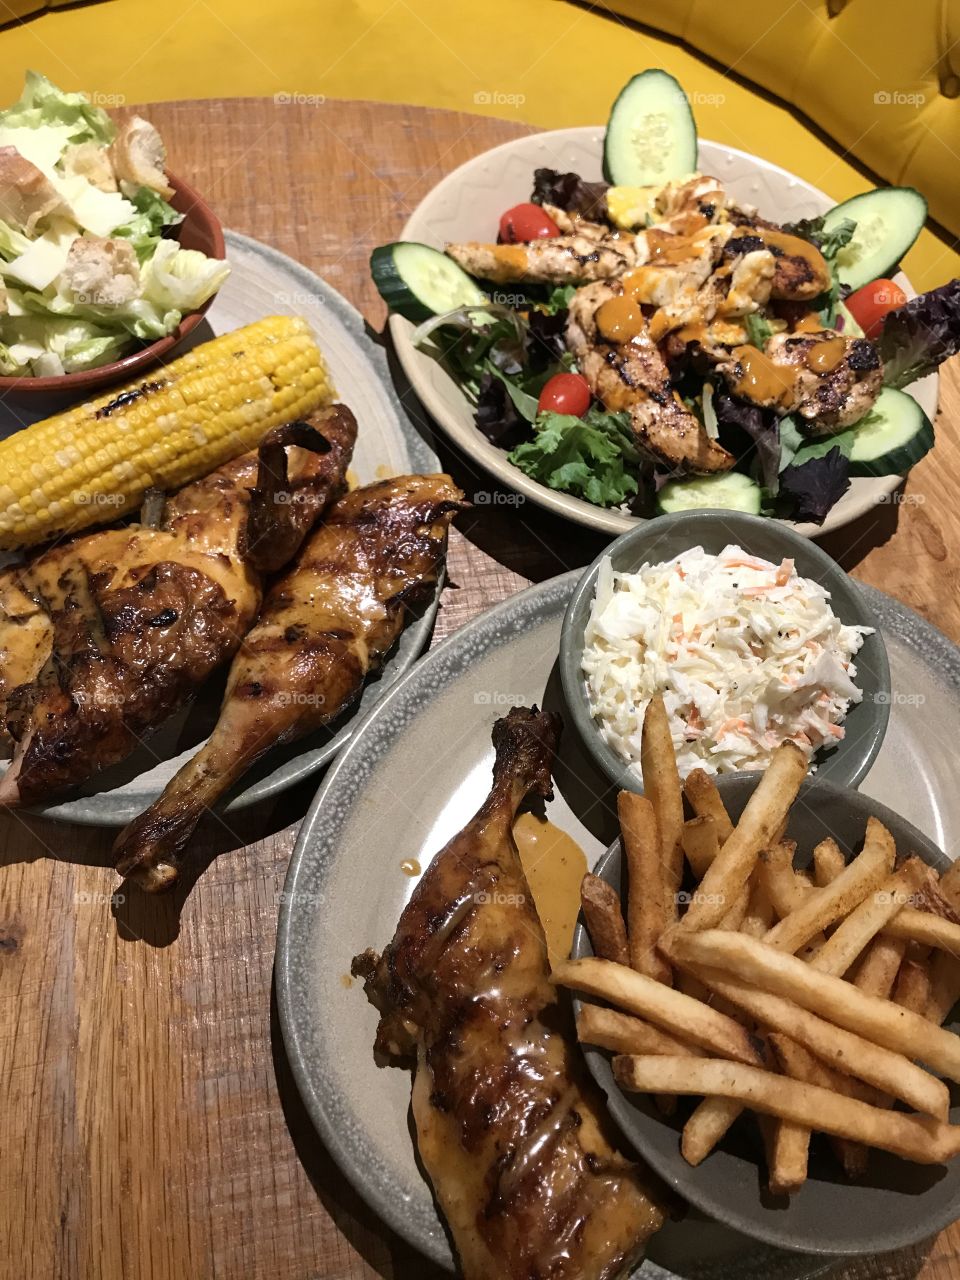 Nando’s Flame-Grilled Chicken 👌🏽